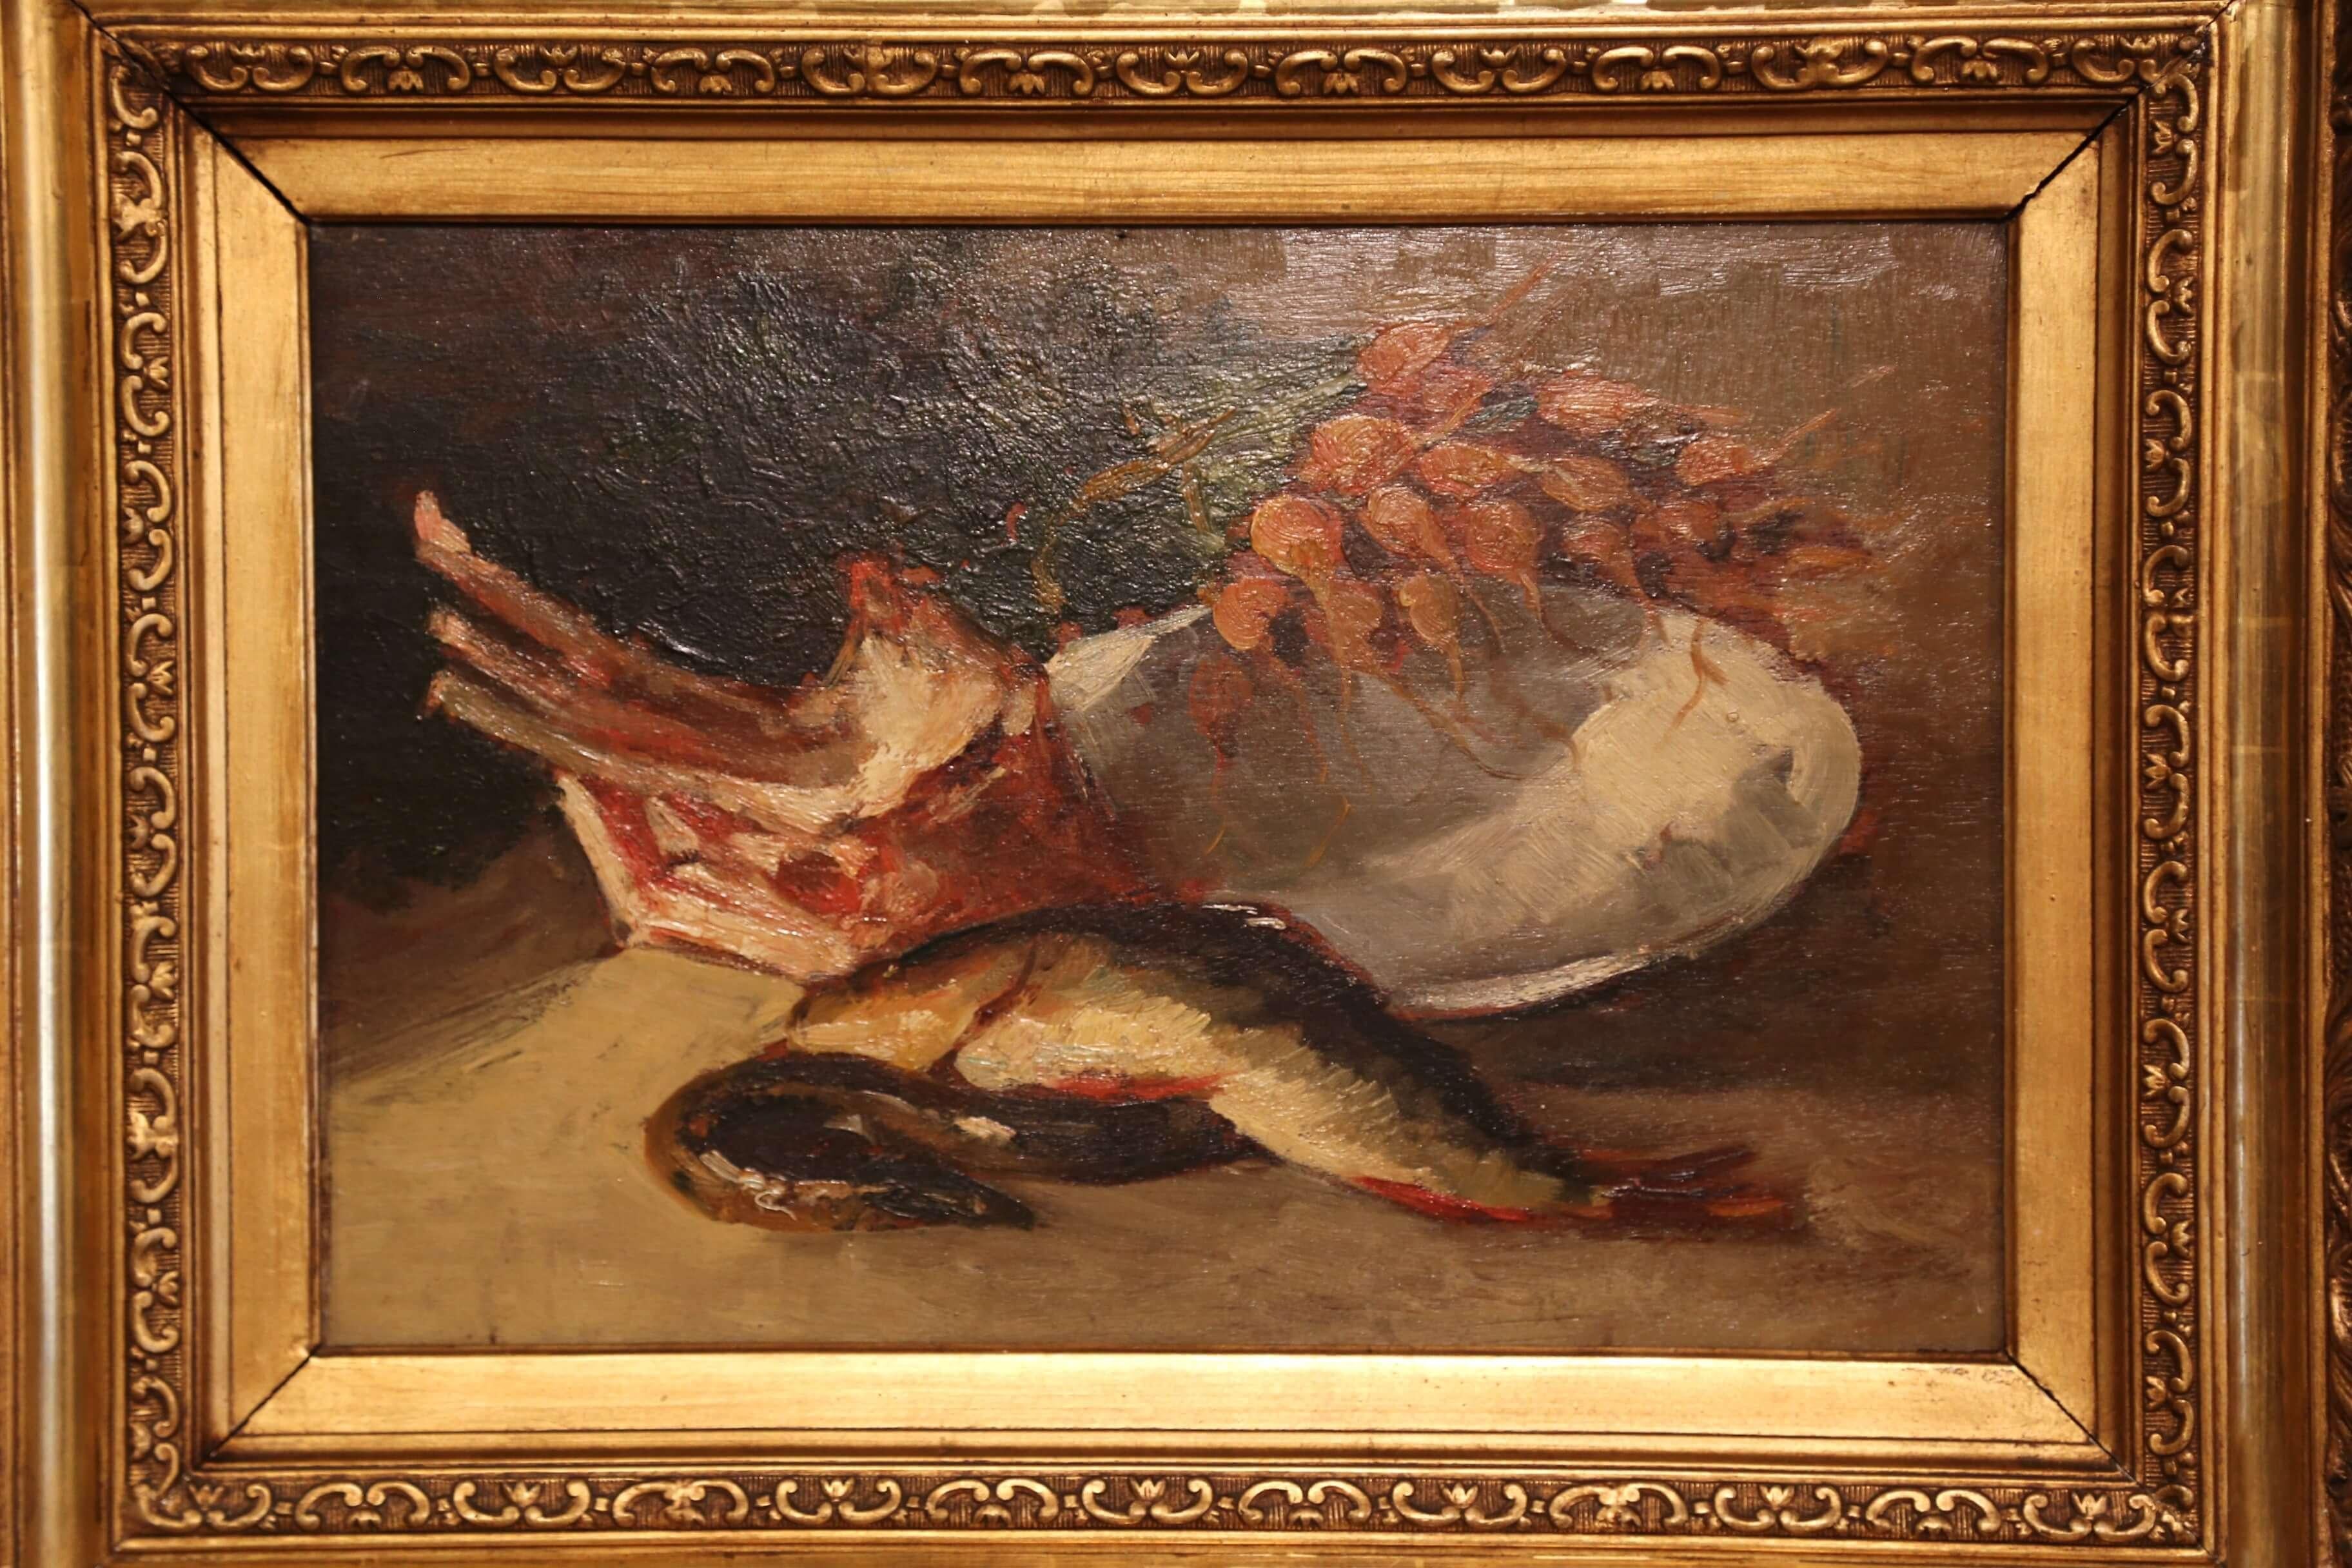 This still-life painting was created in France, circa 1870. Set in an ornate carved giltwood frame, the art work features a typical still life food display on table cloth including a fish and heel, a bunch of radishes and some ribs on a white plate.